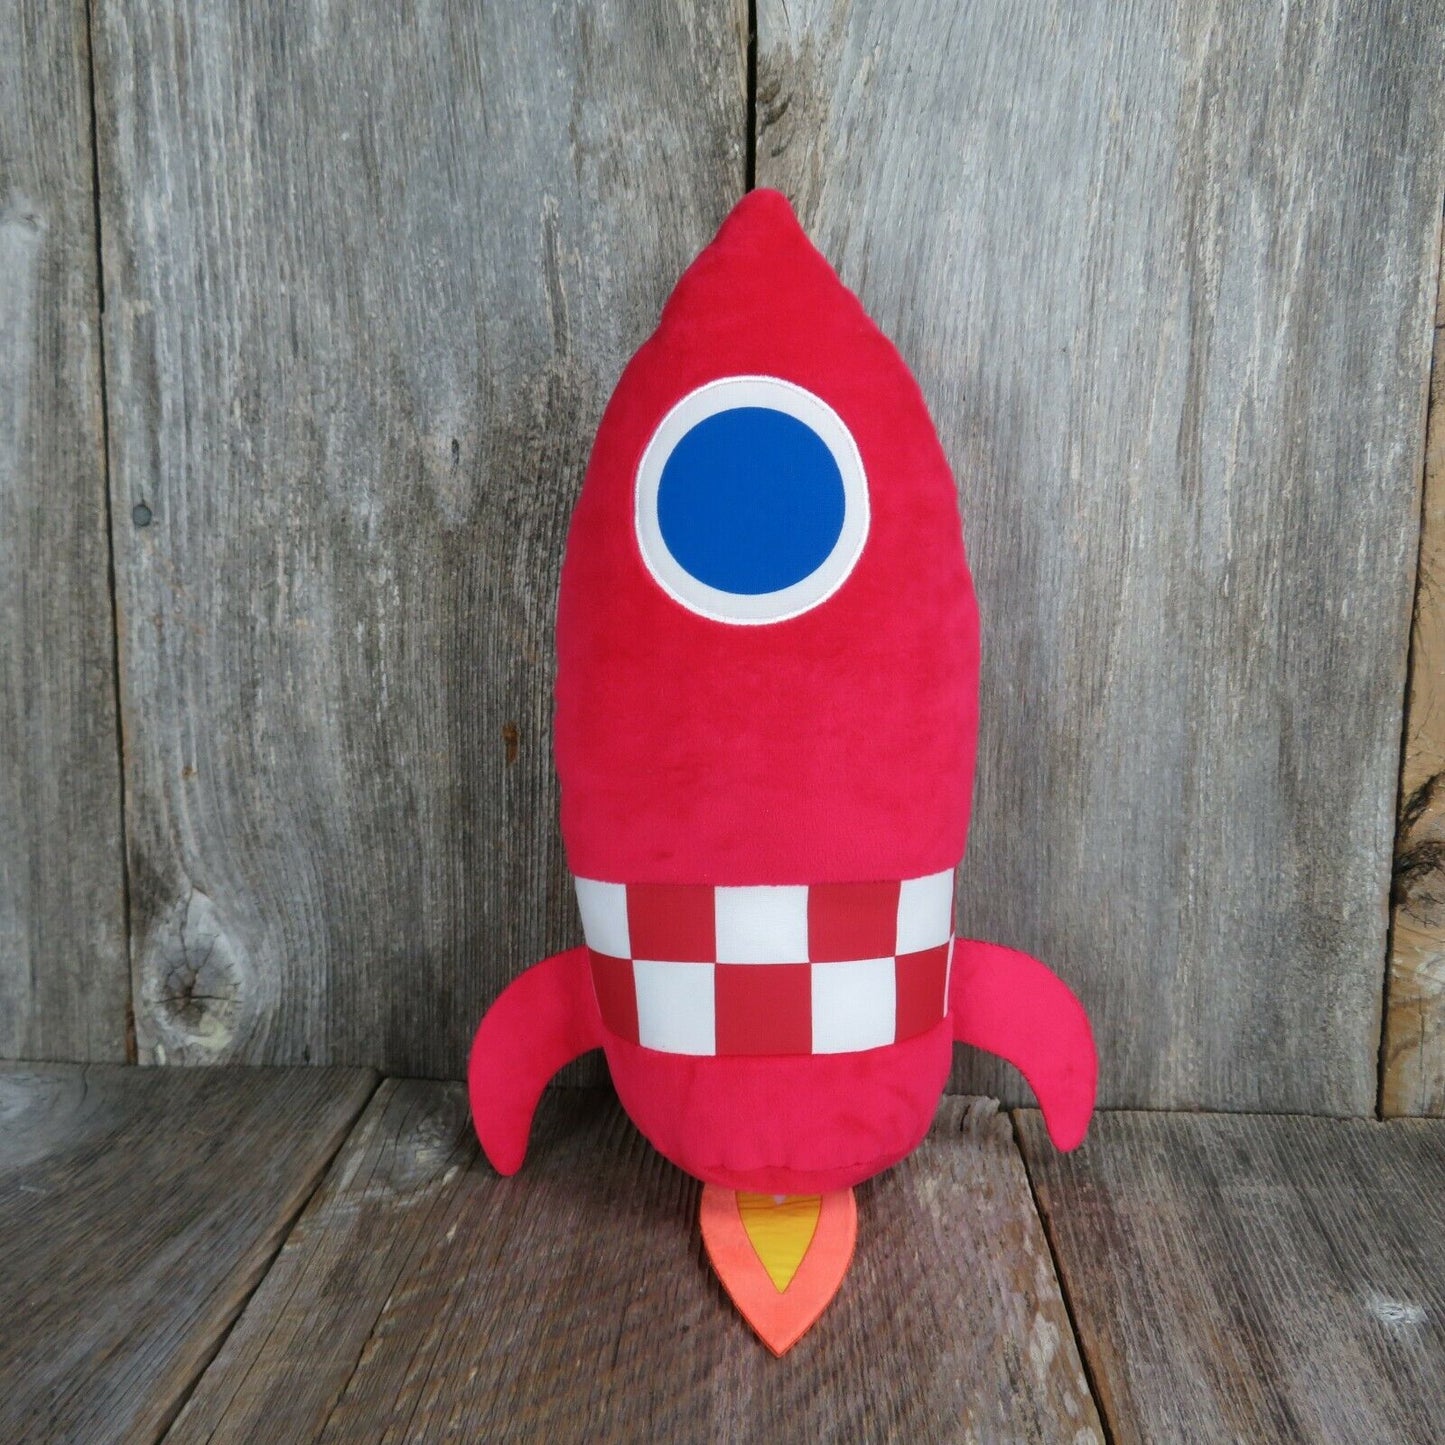 Red Rocket Plush How to Catch a Star Kohls Cares Oliver Jeffers Story Stuffed